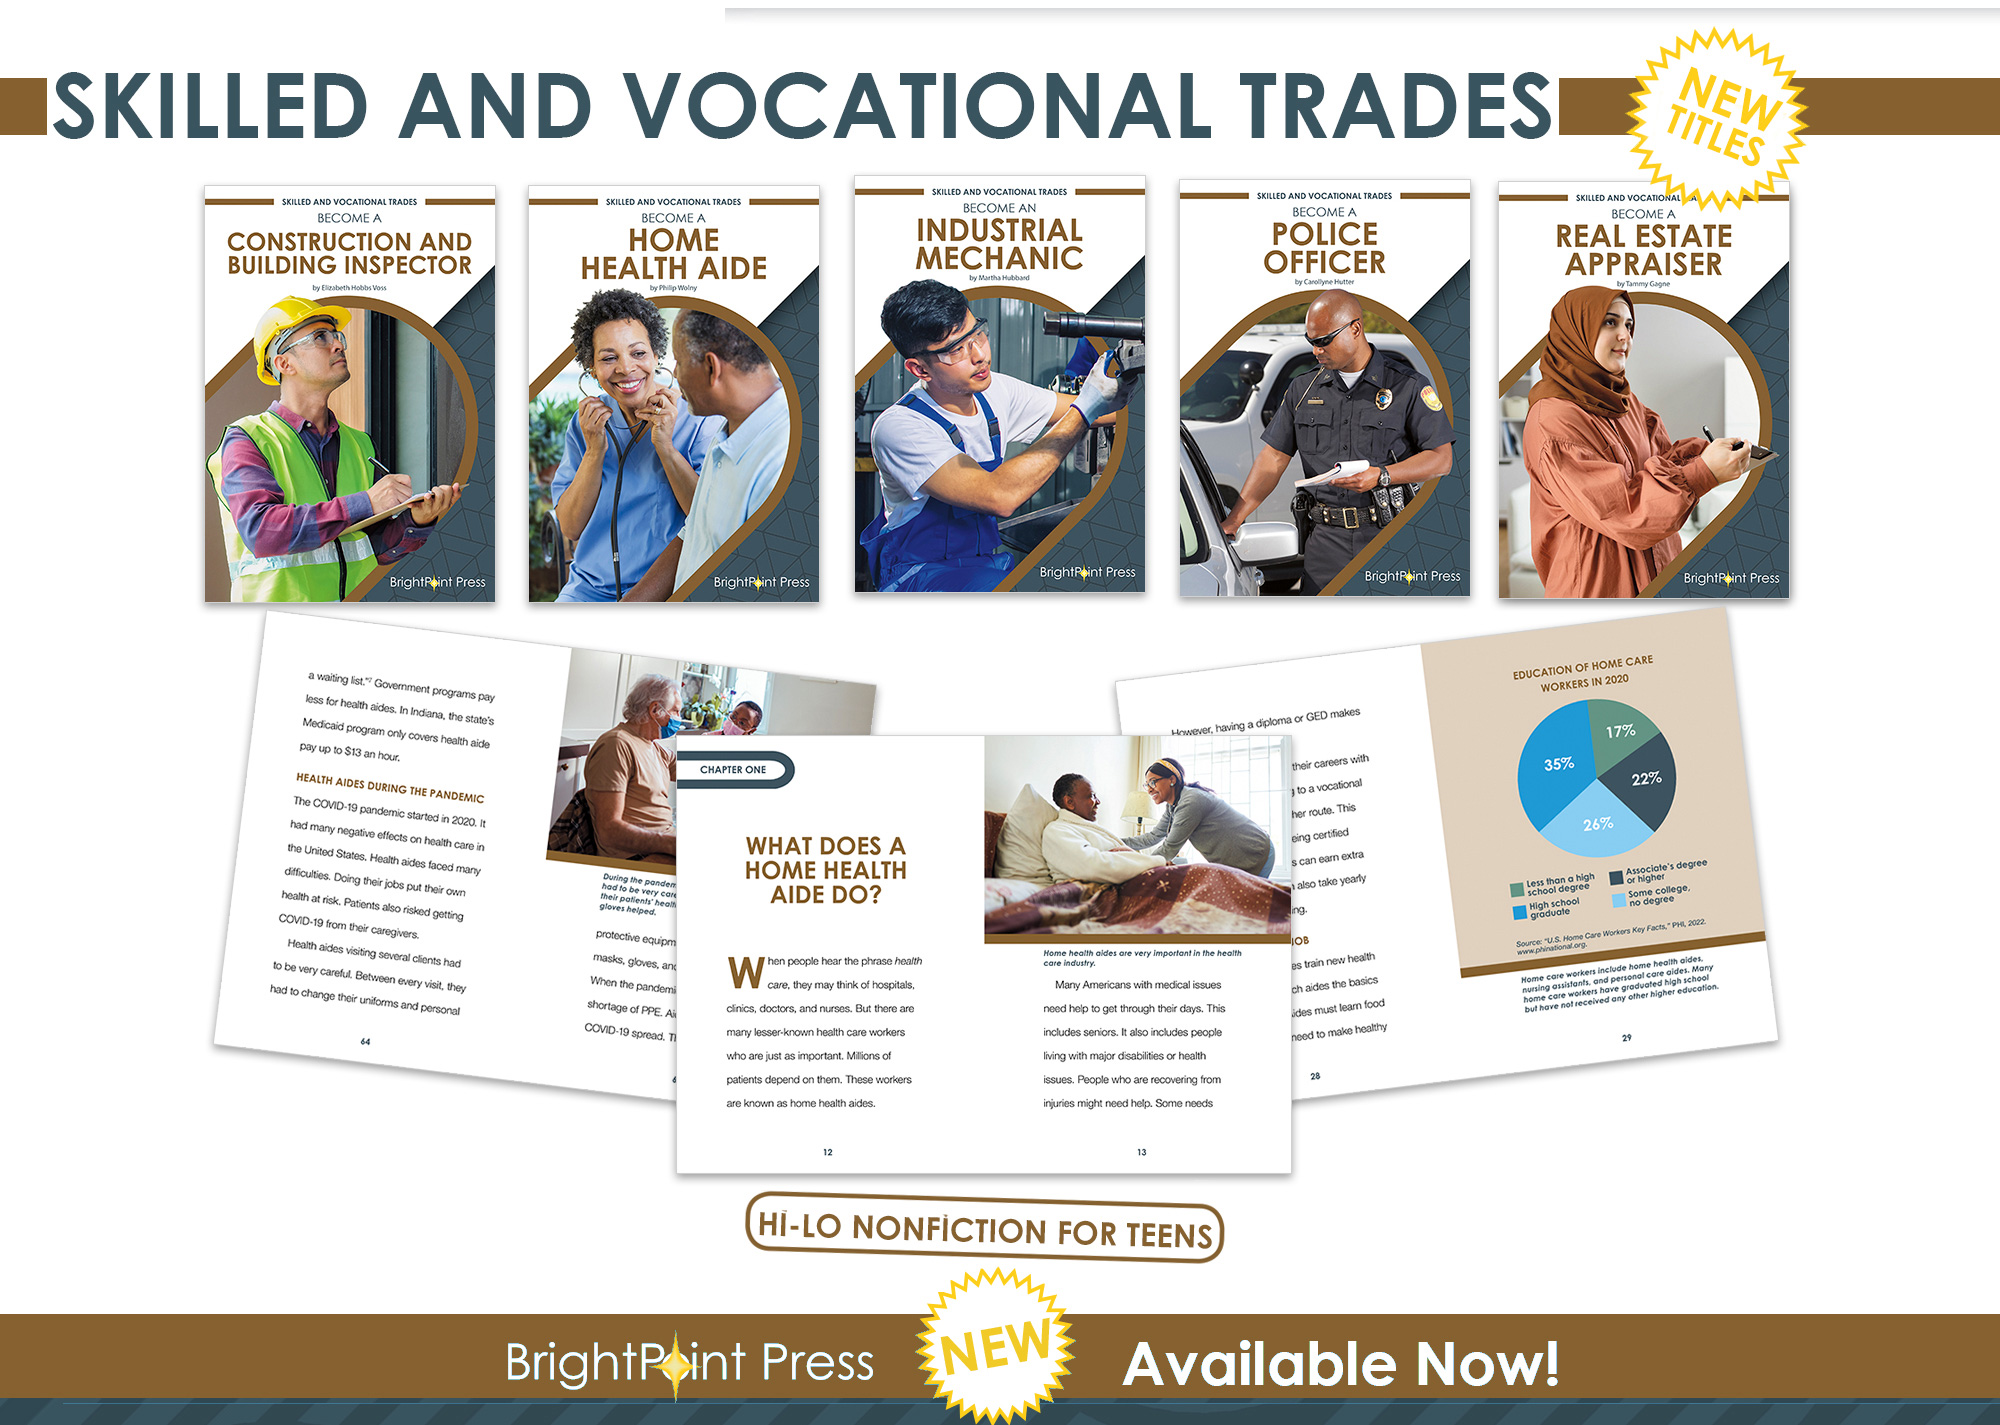 Skilled and Vocational Trades